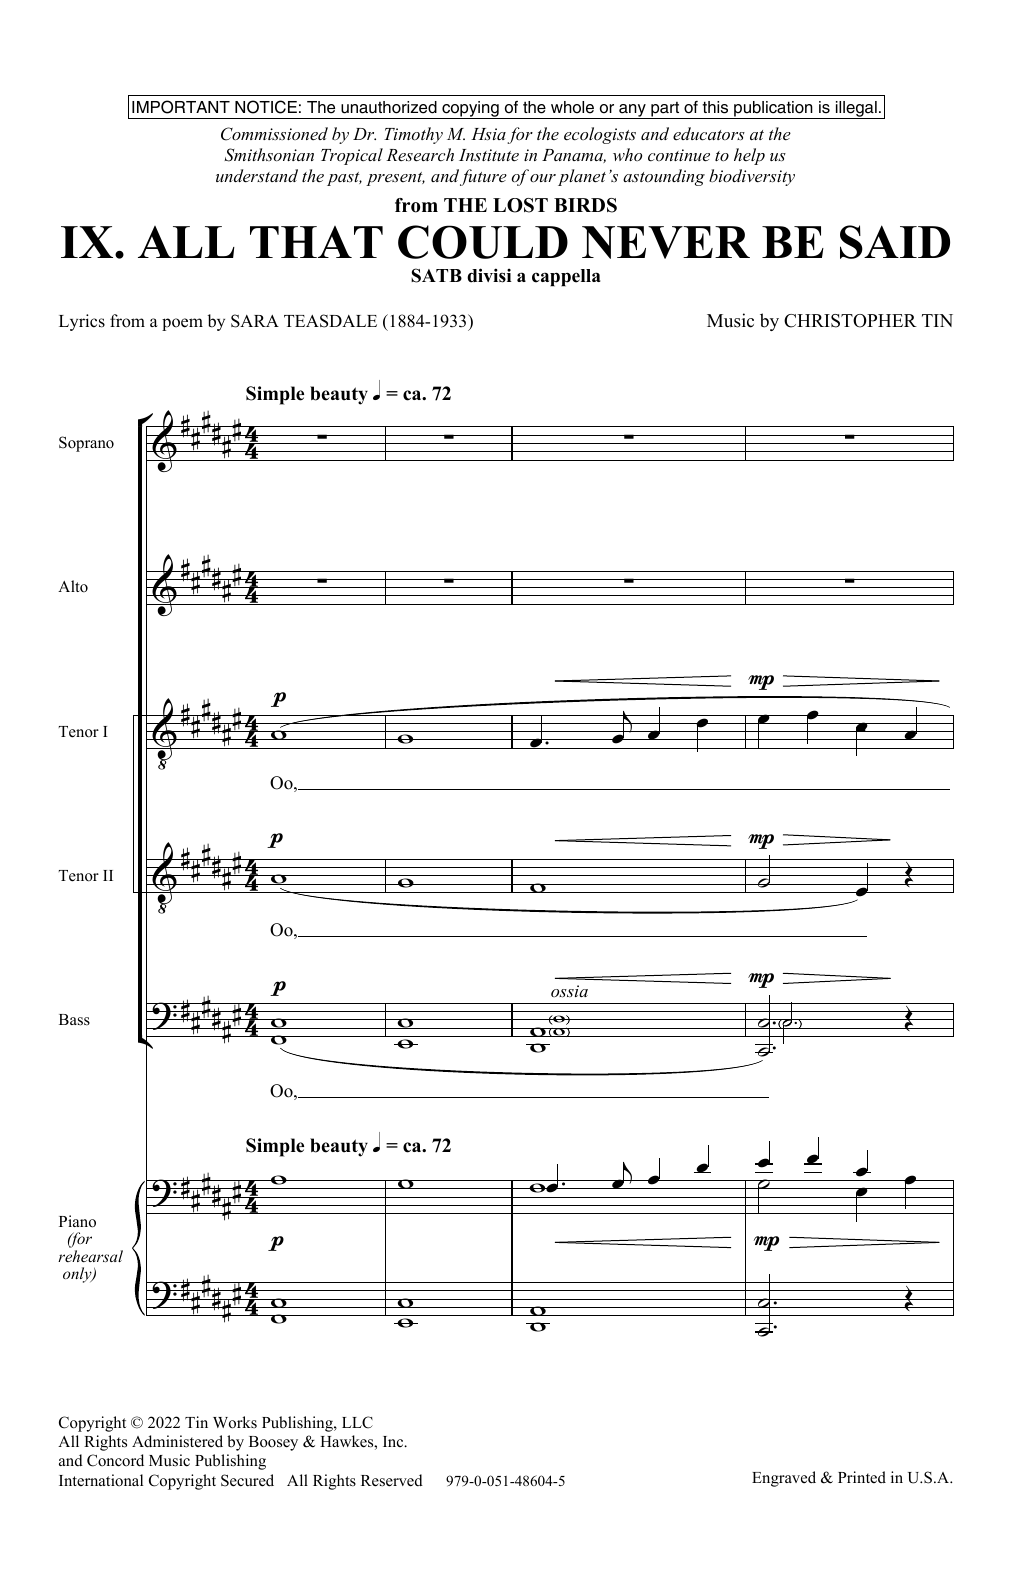 Download Christopher Tin All That Could Never Be Said (Movement Sheet Music